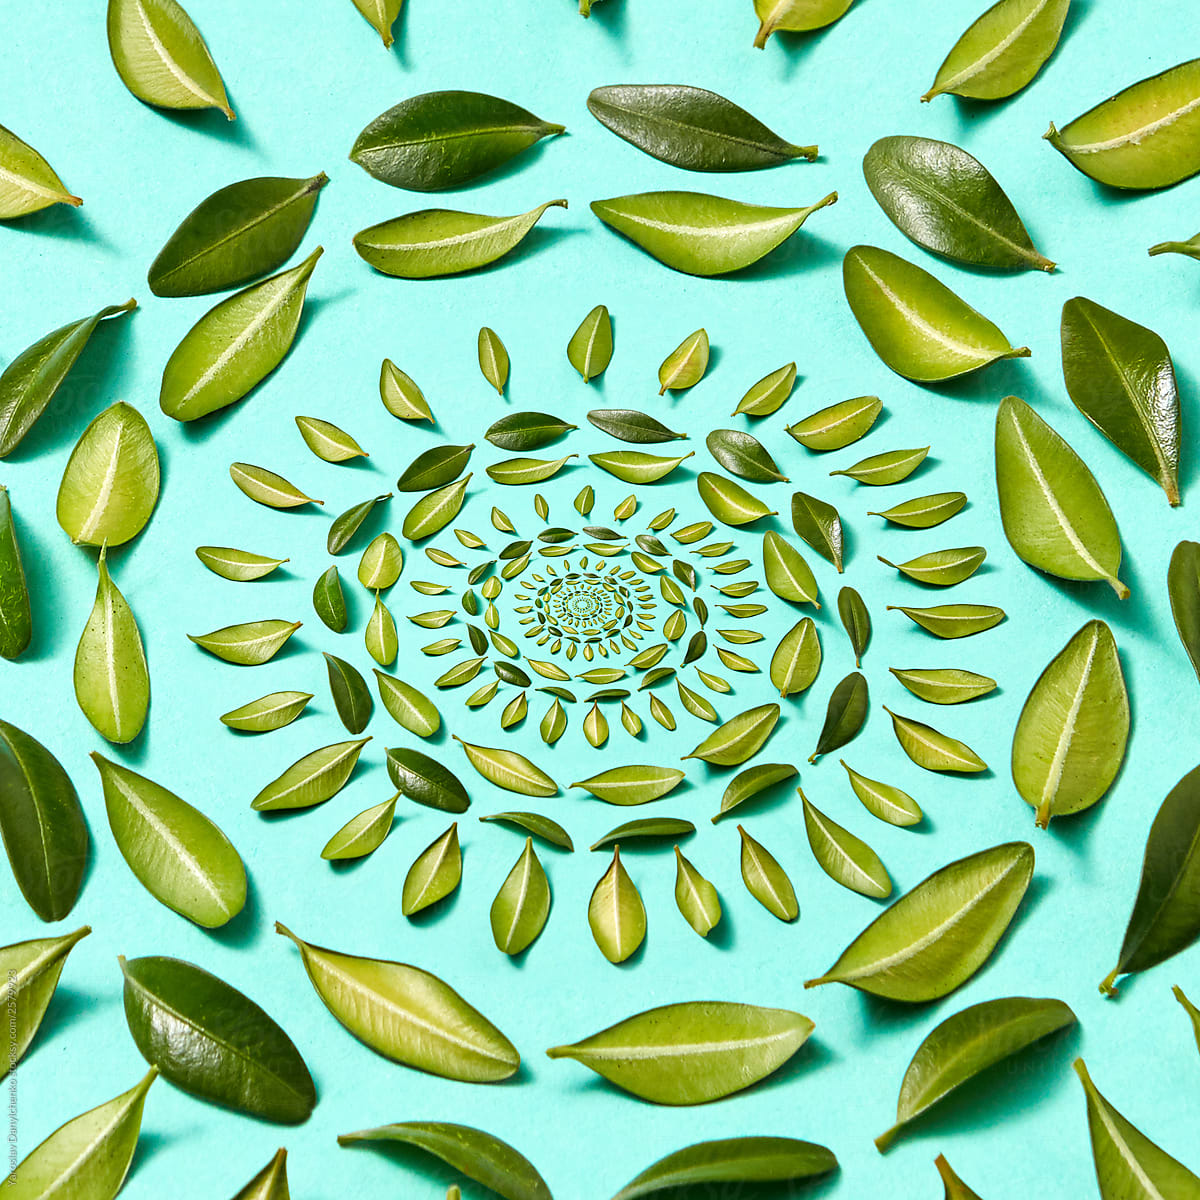 Leaves pattern on a turquoise background